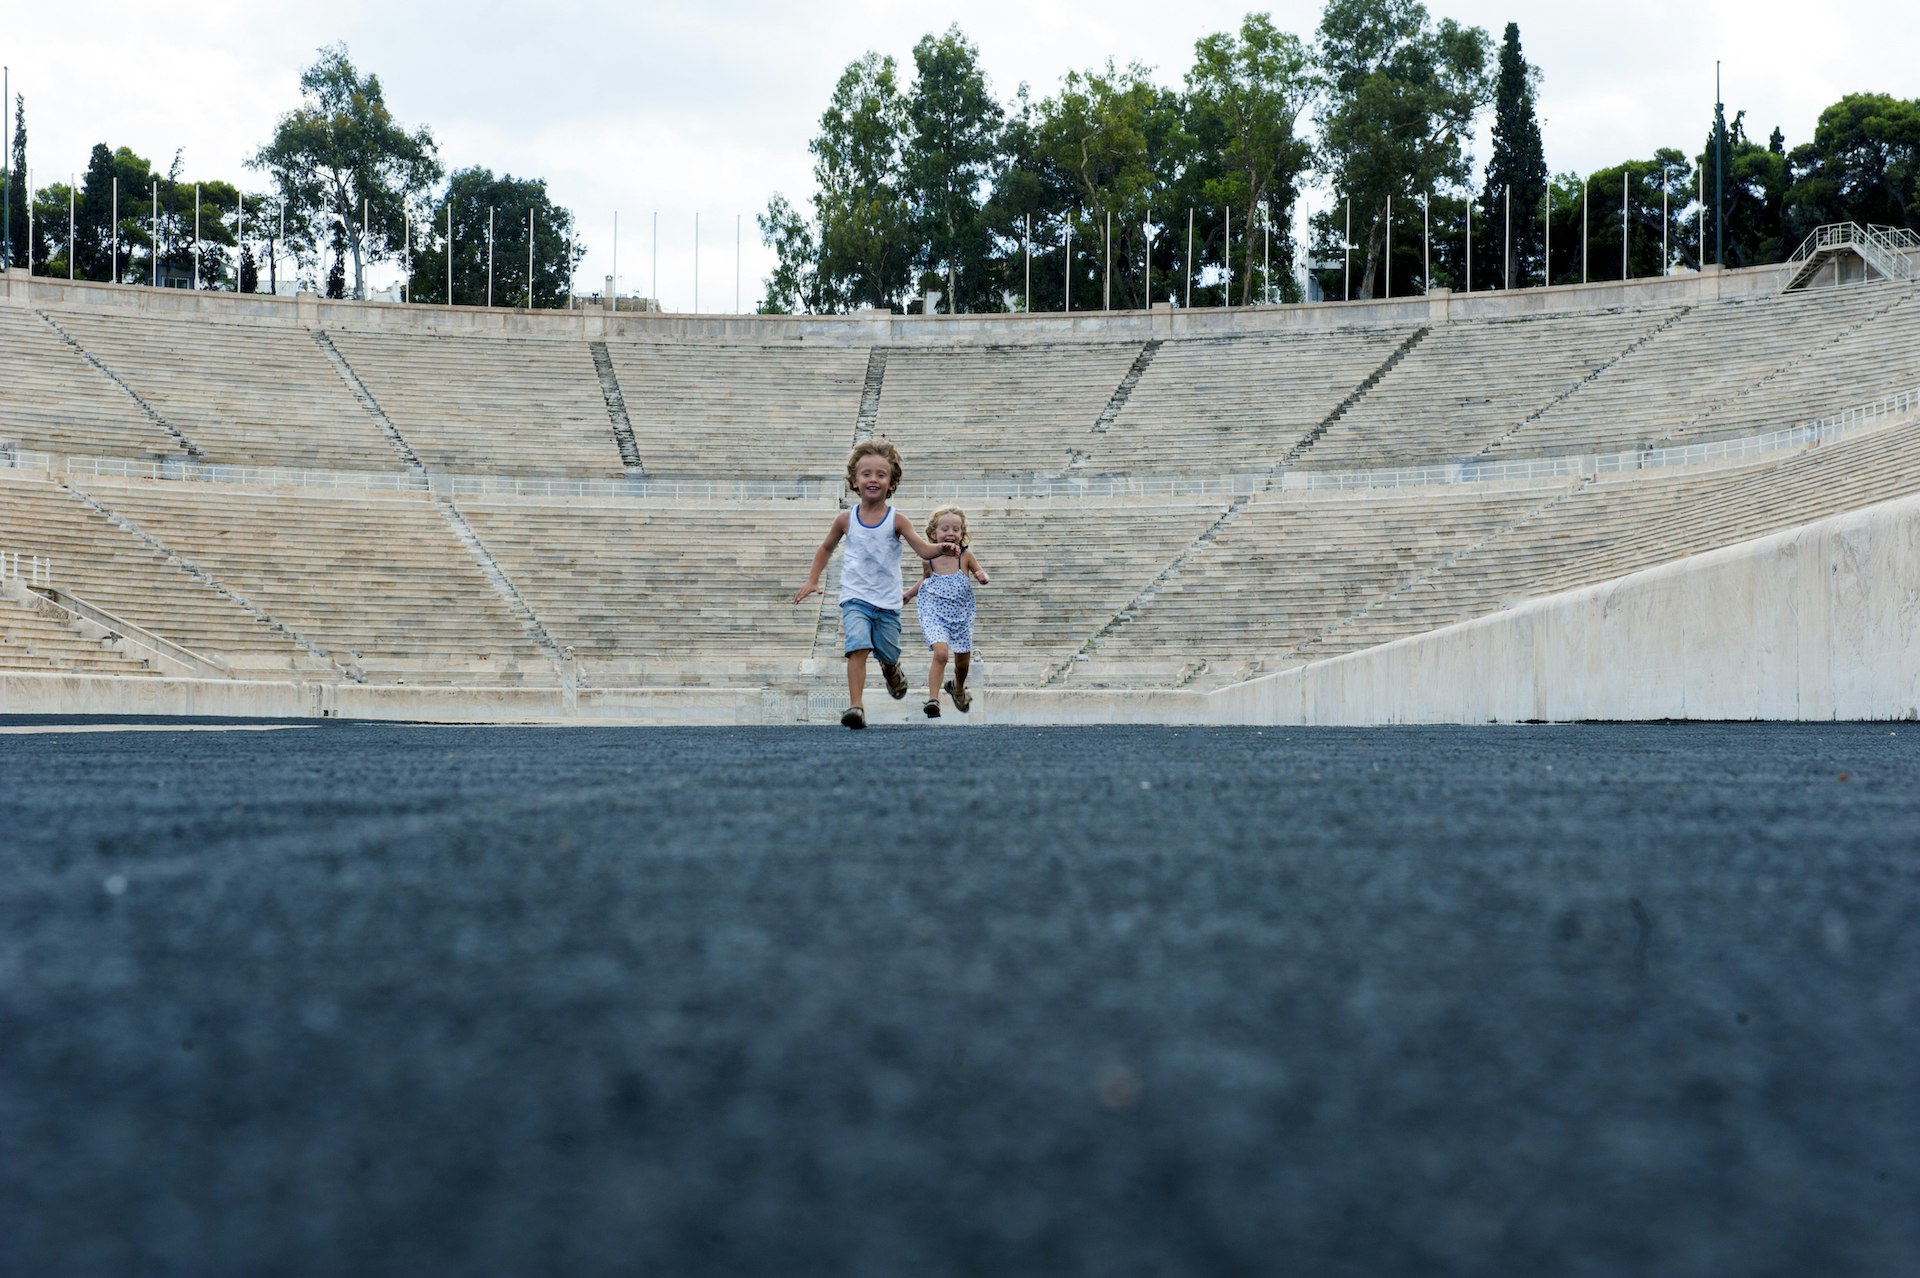 Two young children, a boy and a girl, run inside the Panathenaic Stadium in Athens